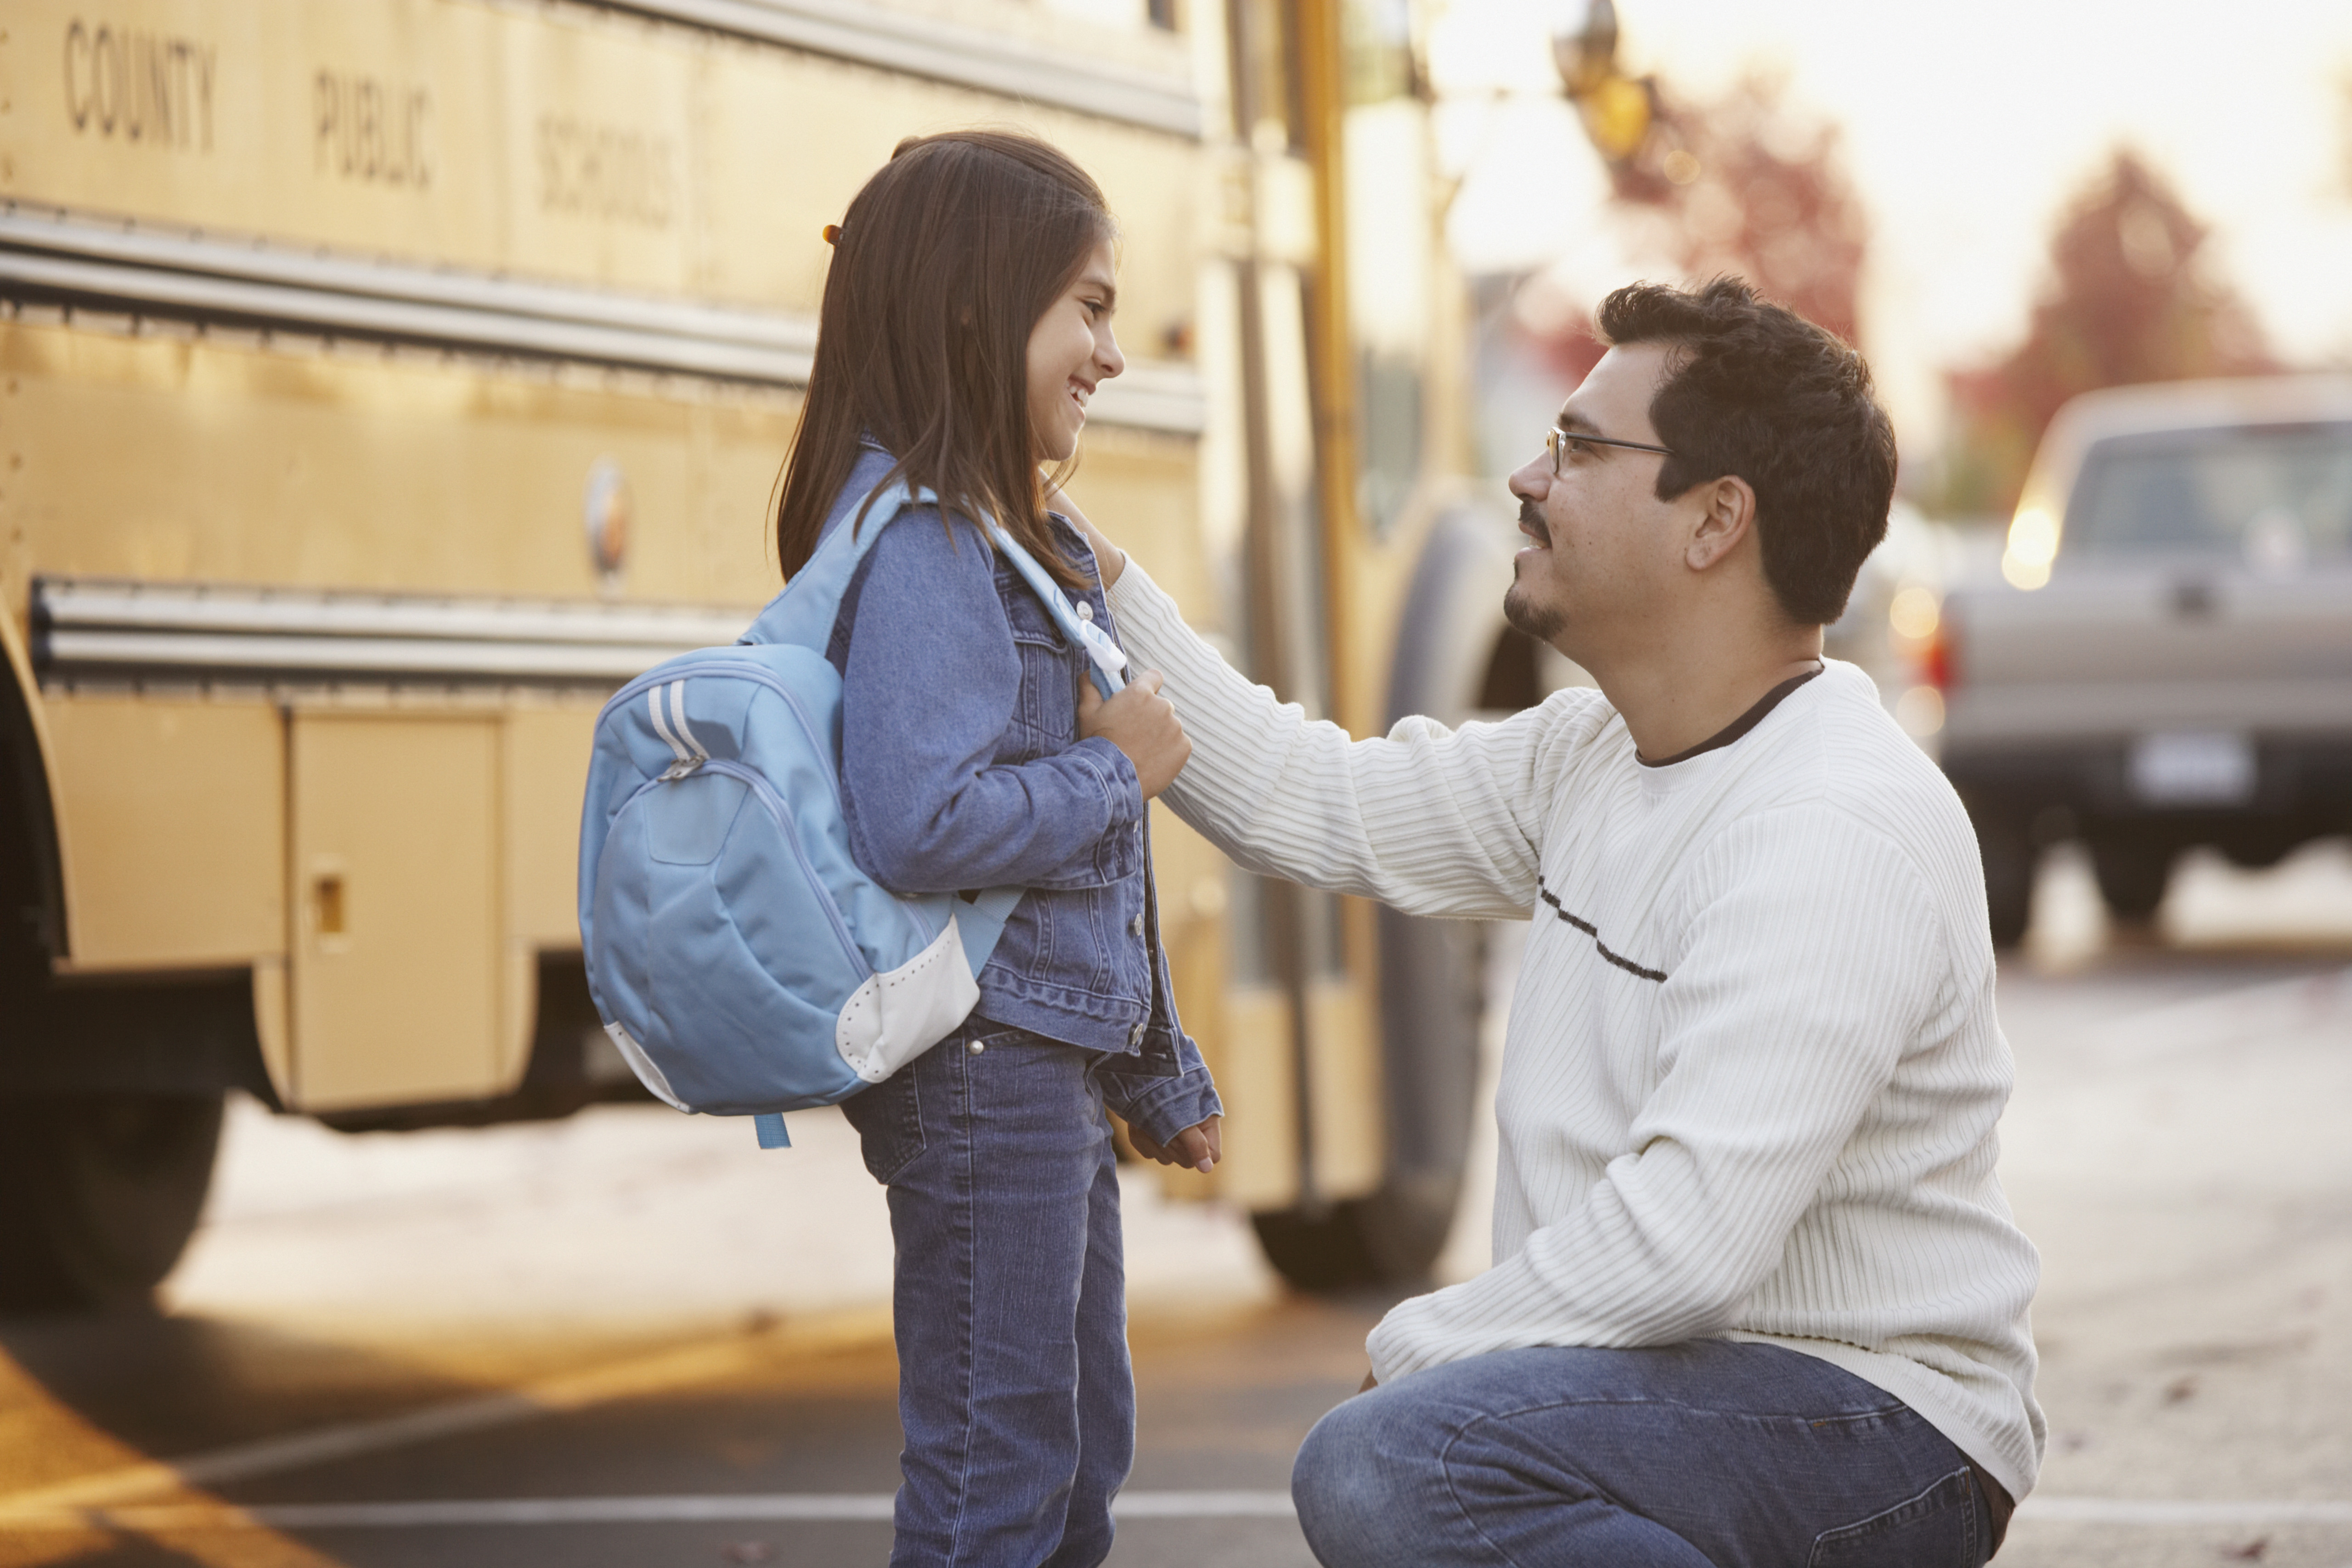 Time & money-saving tips for back-to-school